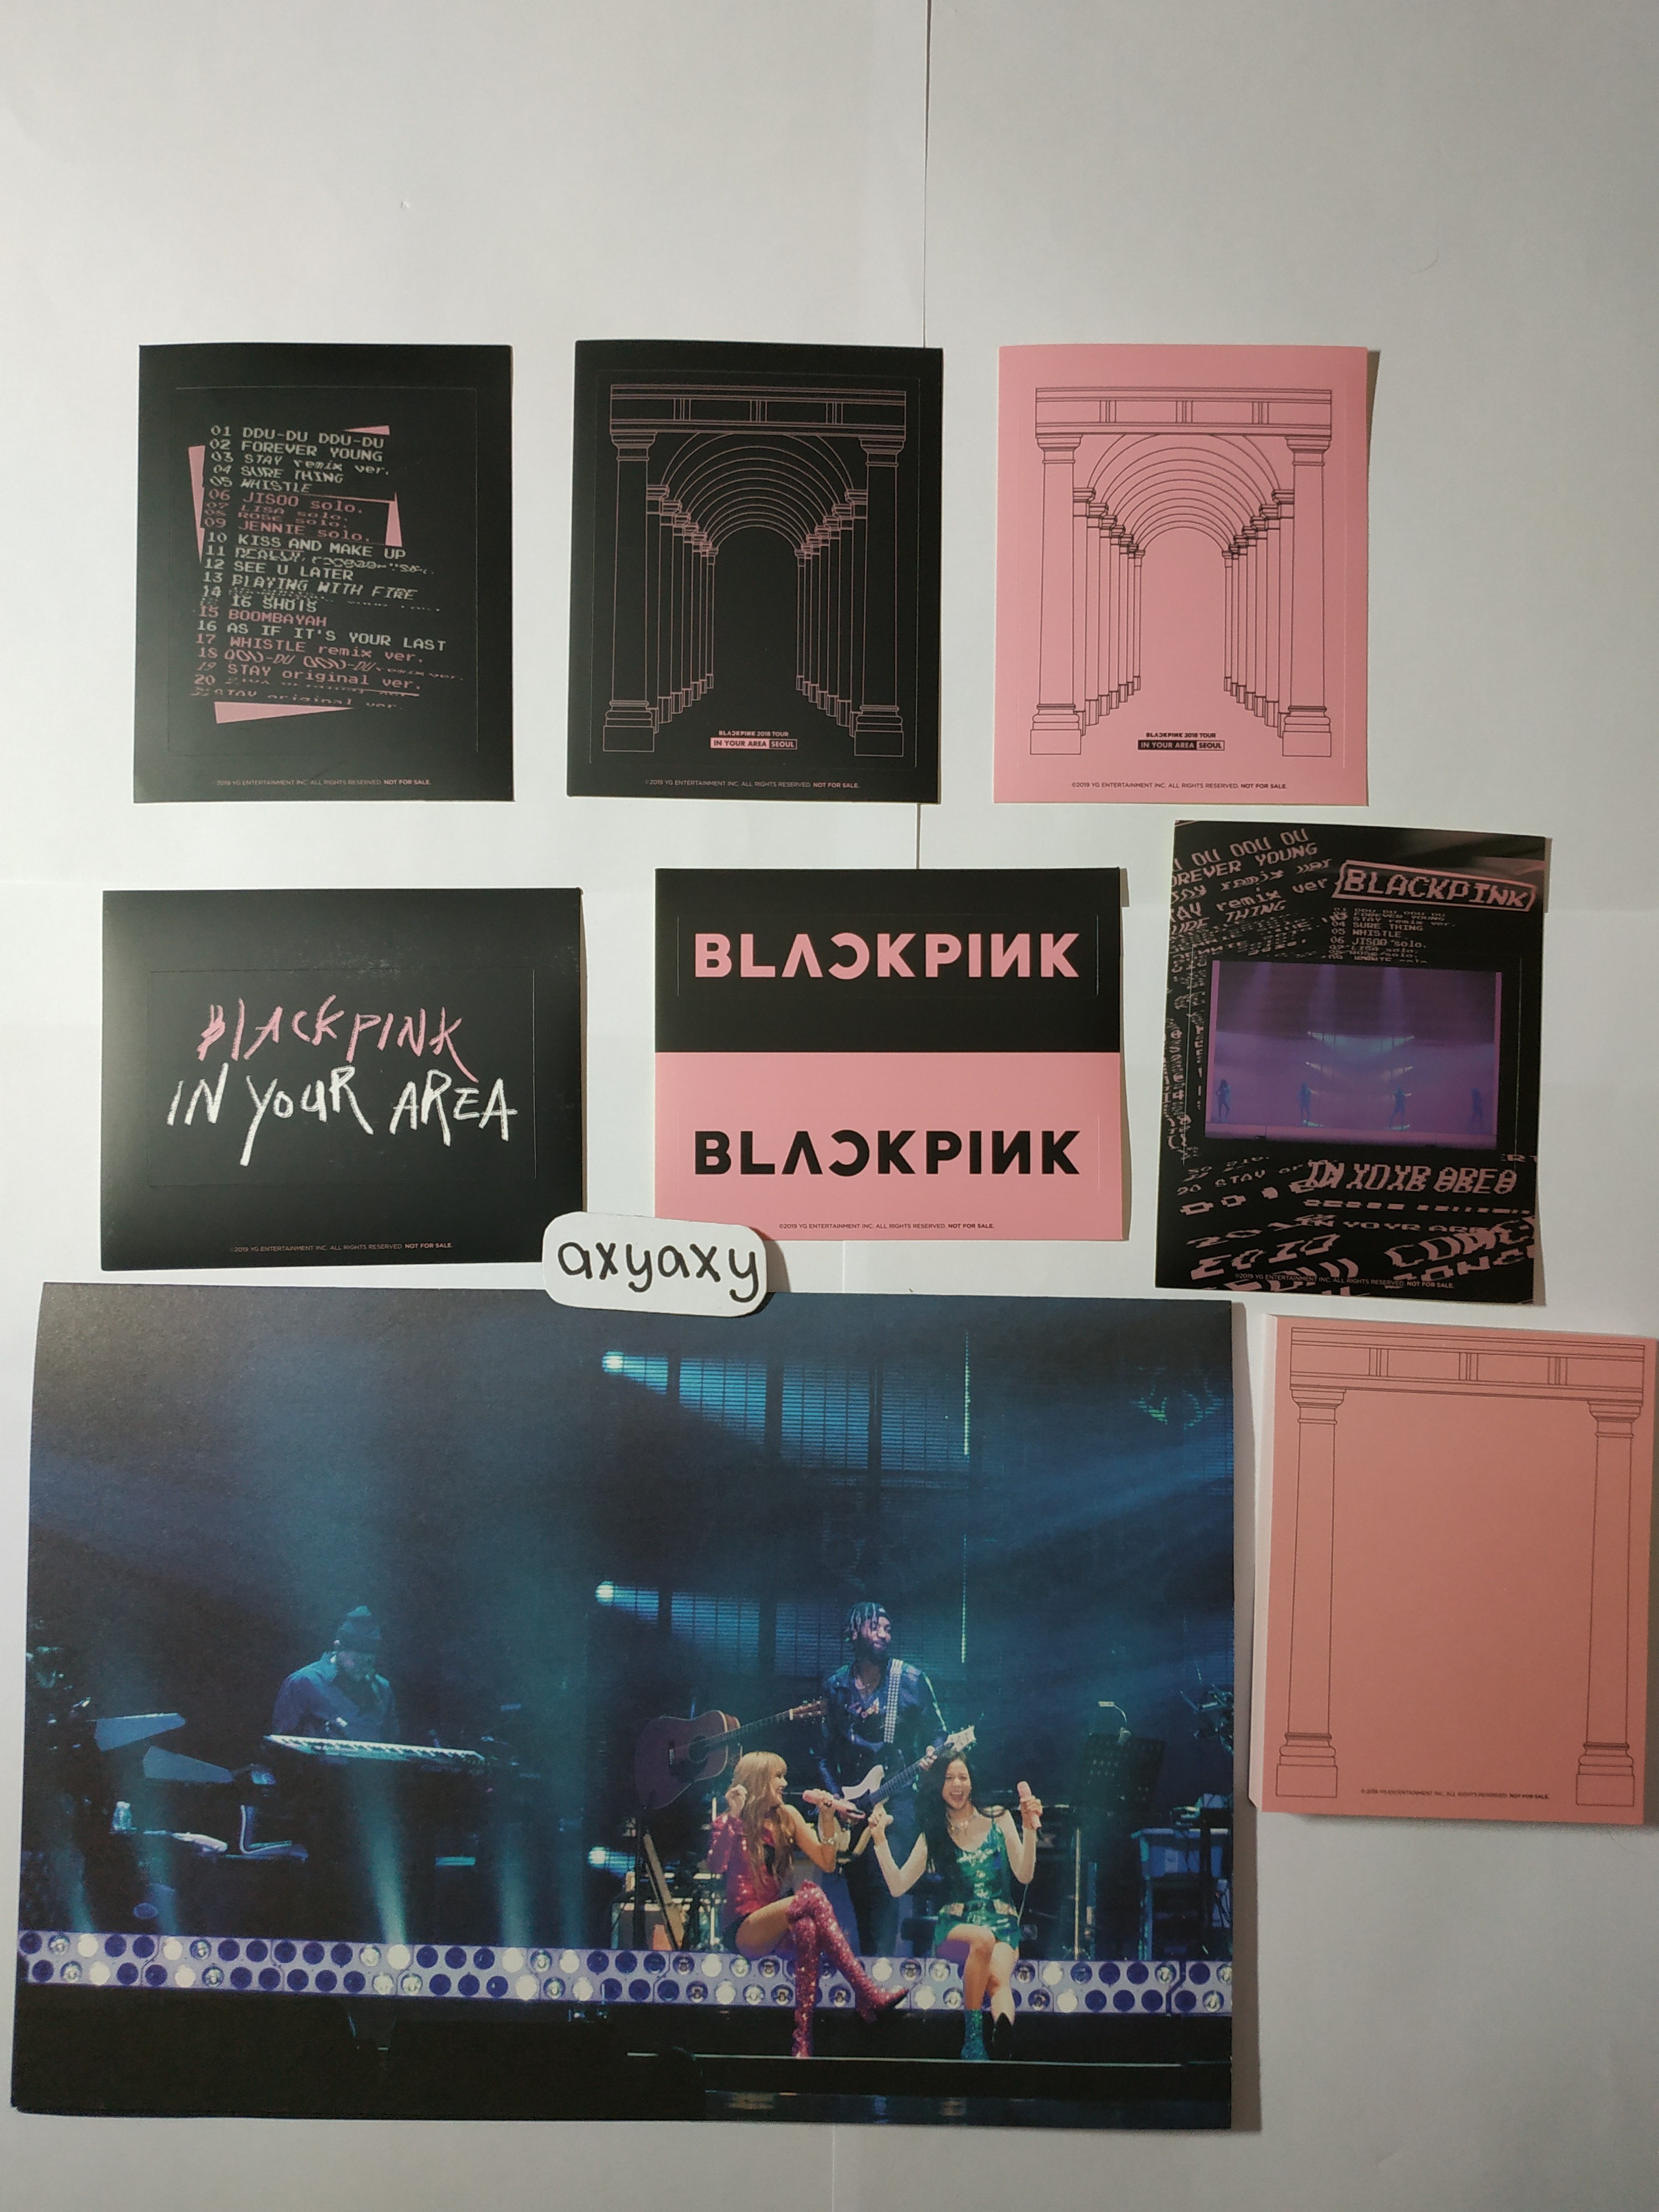 WTS] BLACKPINK 2018 TOUR 'IN YOUR AREA' SEOUL DVD: Sticker Set +